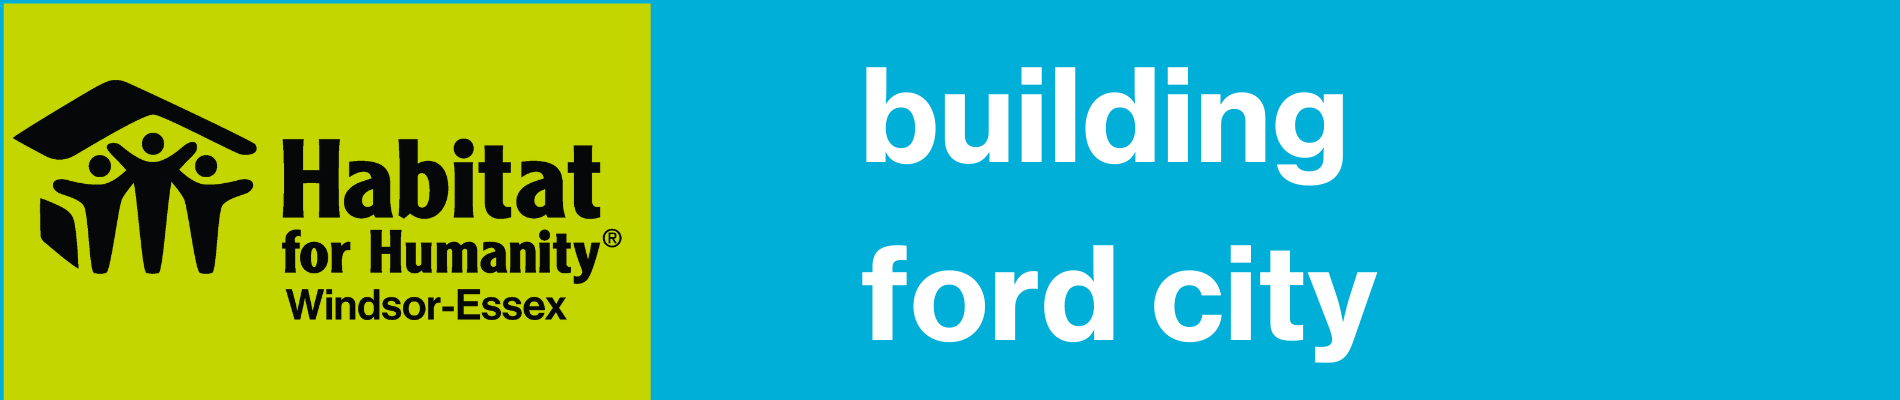 building ford city